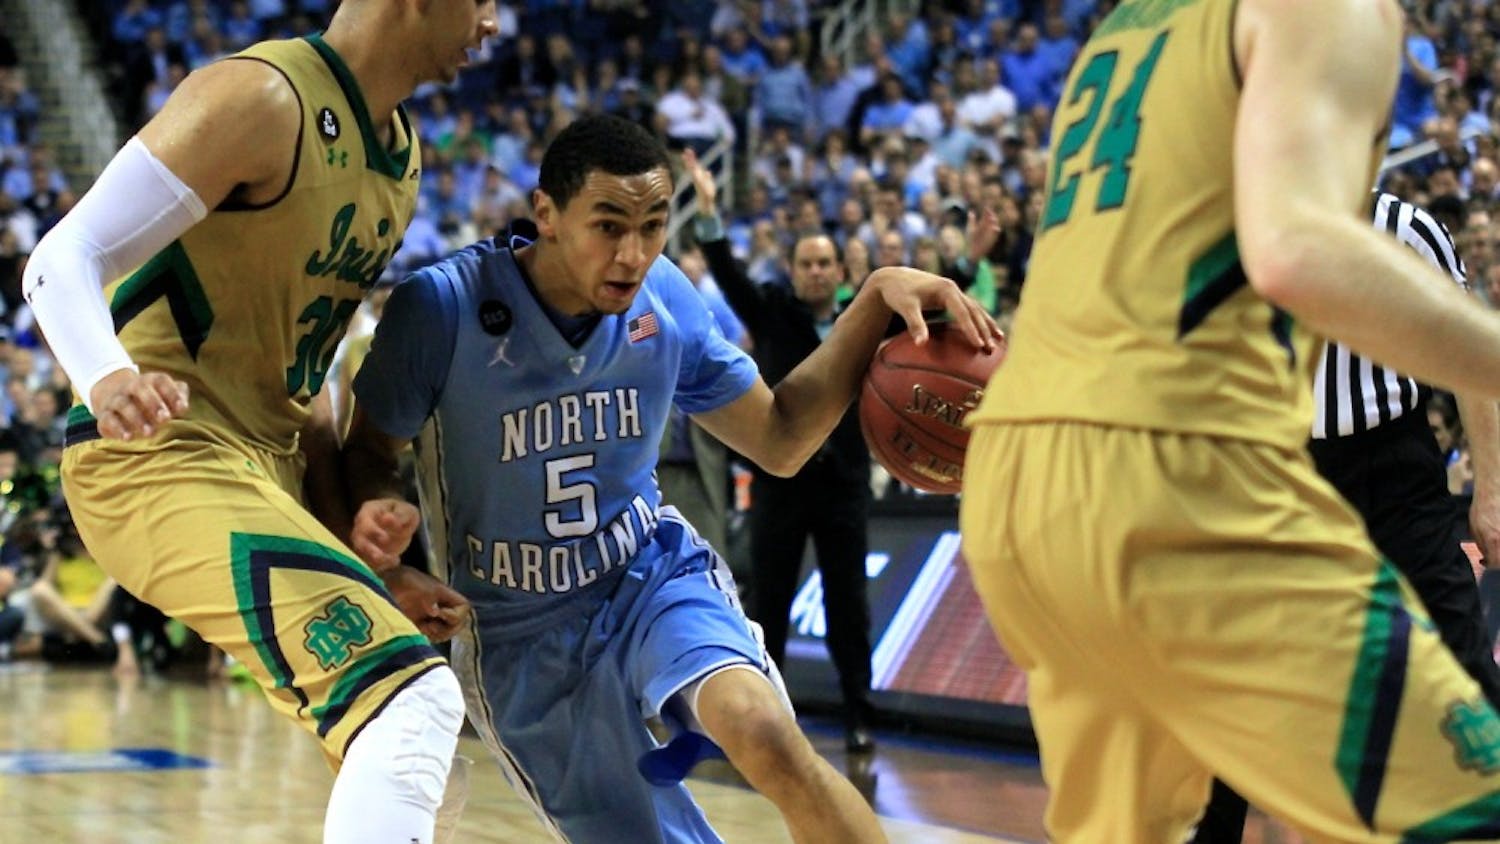 Marcus Paige (5) led the Tar Heels in points, scoring 24 total, Saturday night in the ACC championship game against Notre Dame. The Notre Dame leading scorer, Jerian Grant (22), also scored 24 points. 